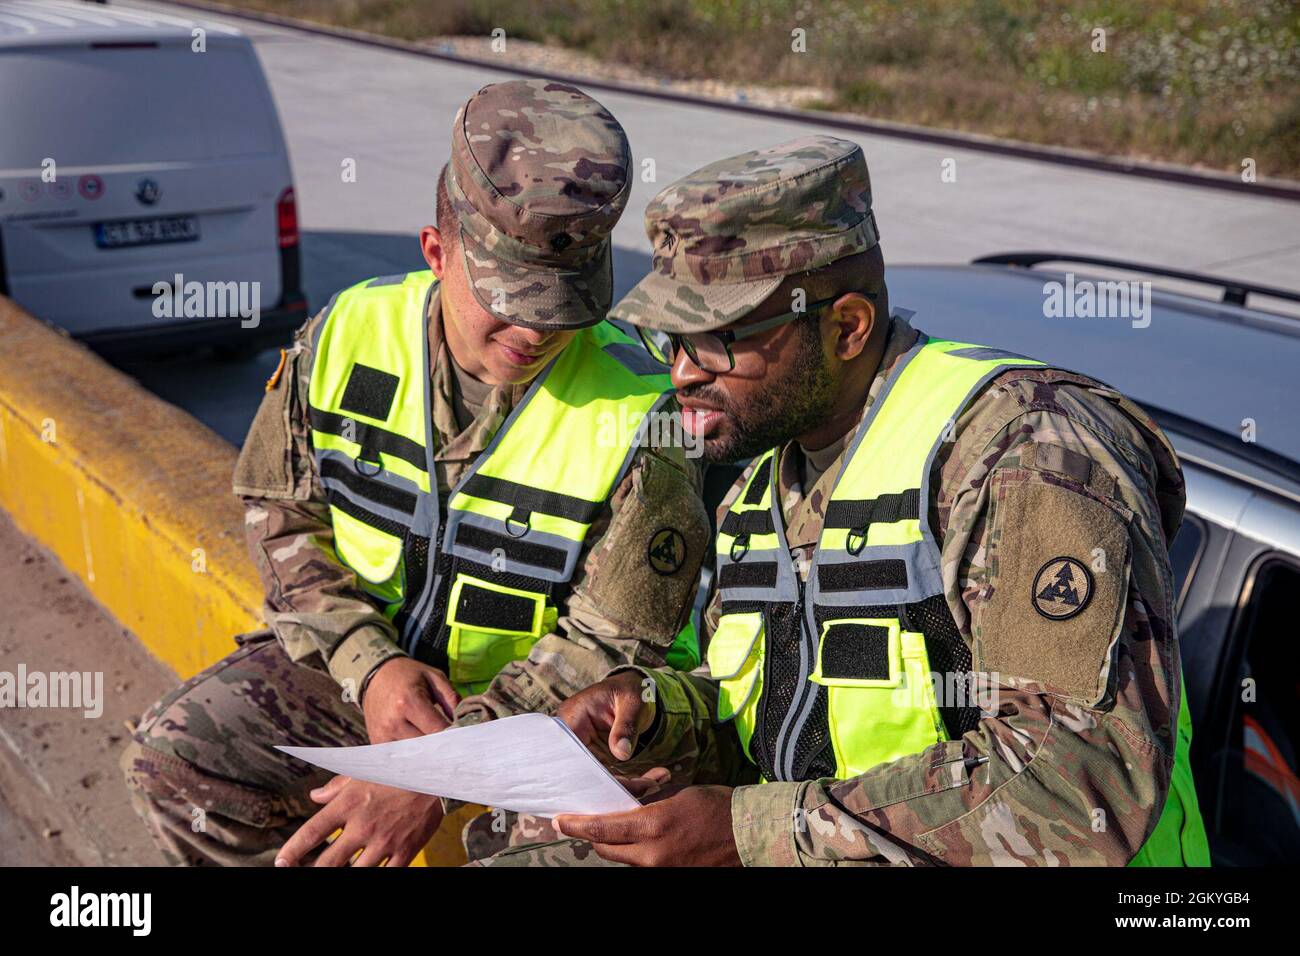 Soldiers assigned to 1st Battalion, 16th Infantry Regiment, 1st Heavy Brigade Combat Team, 1st Infantry Division conducted railhead operations to deliver a fleet of military vehicles to MK Air Base, Romania on July 28, 2021. U.S. Army Sgt. Jamal Slaughter and Spc. Eduardo Rivera, assigned to 261st Movement Control Team, 330th Transportation Battalion, 3rd Sustainment Command (Expeditionary), oversee the safety of the railhead operations. Stock Photo